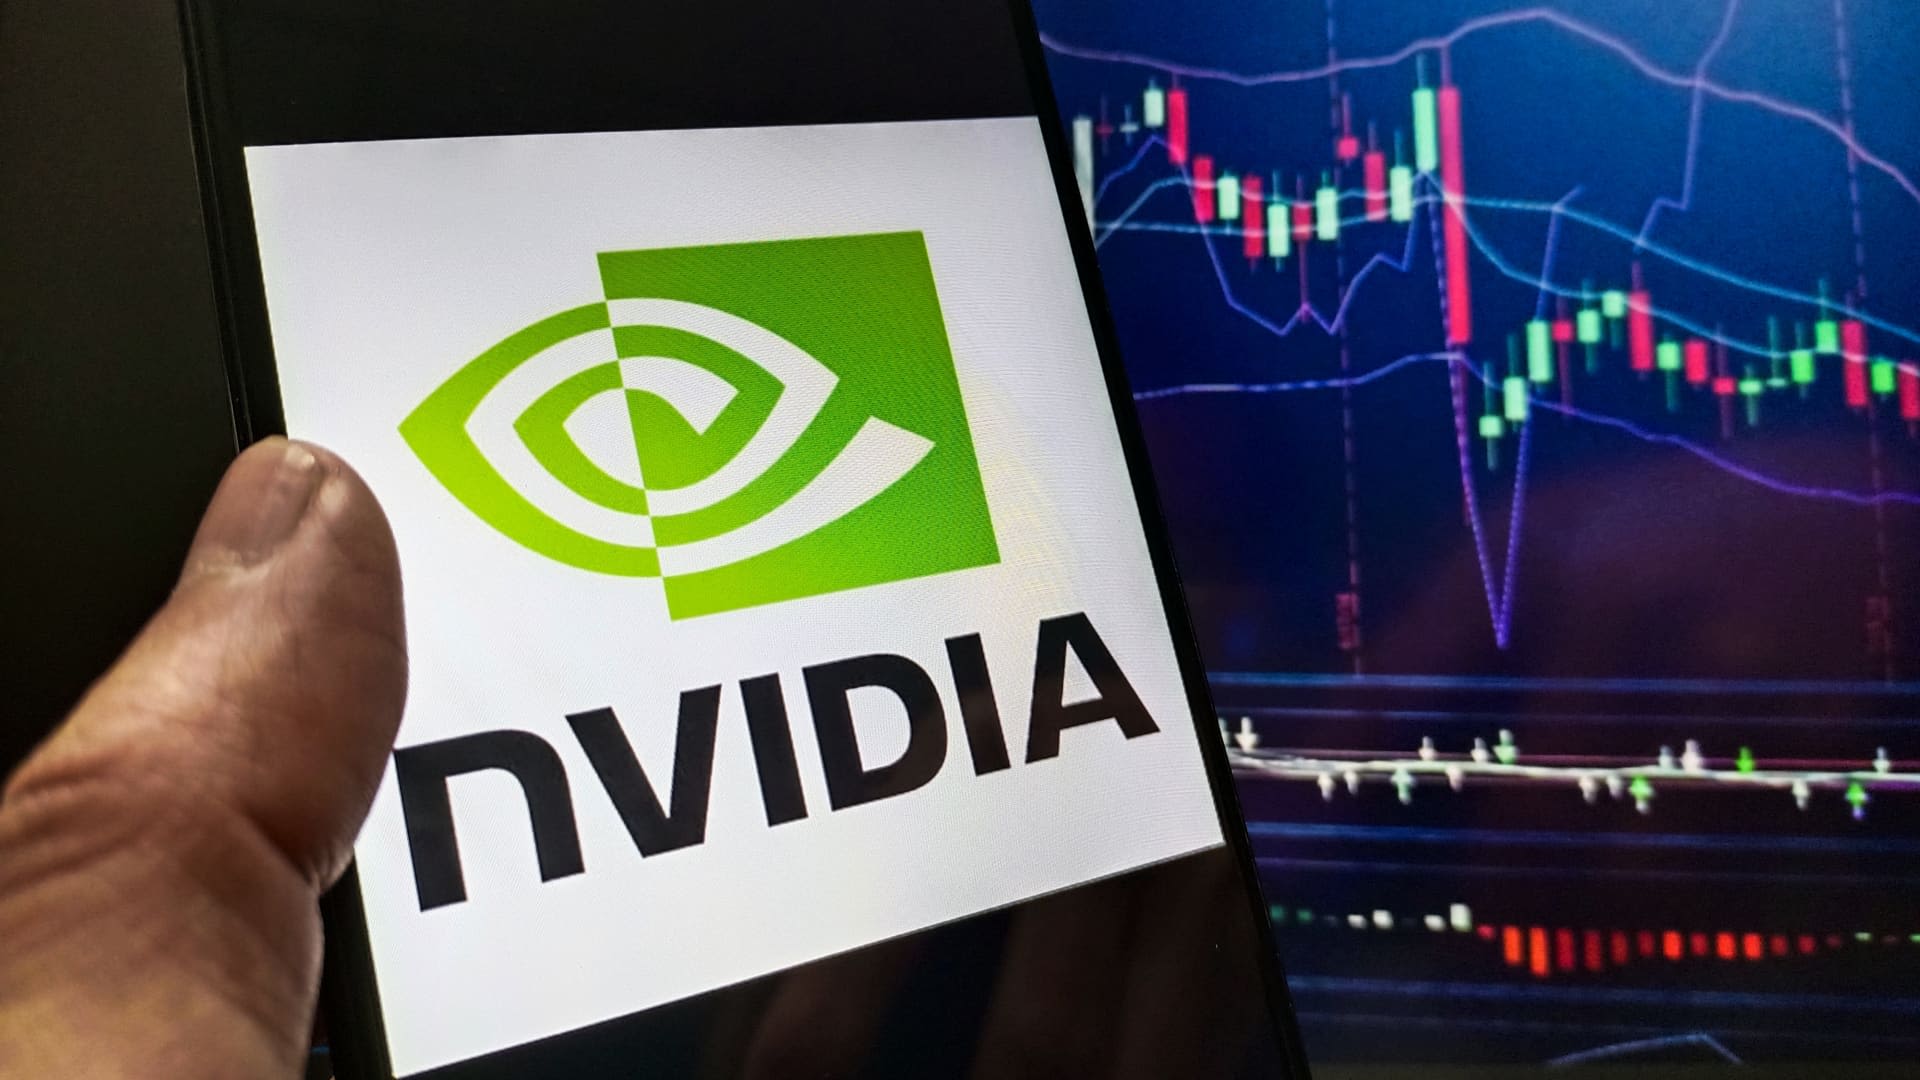 Nvidia is one of the most overbought stocks on Wall Street. Here are the rest